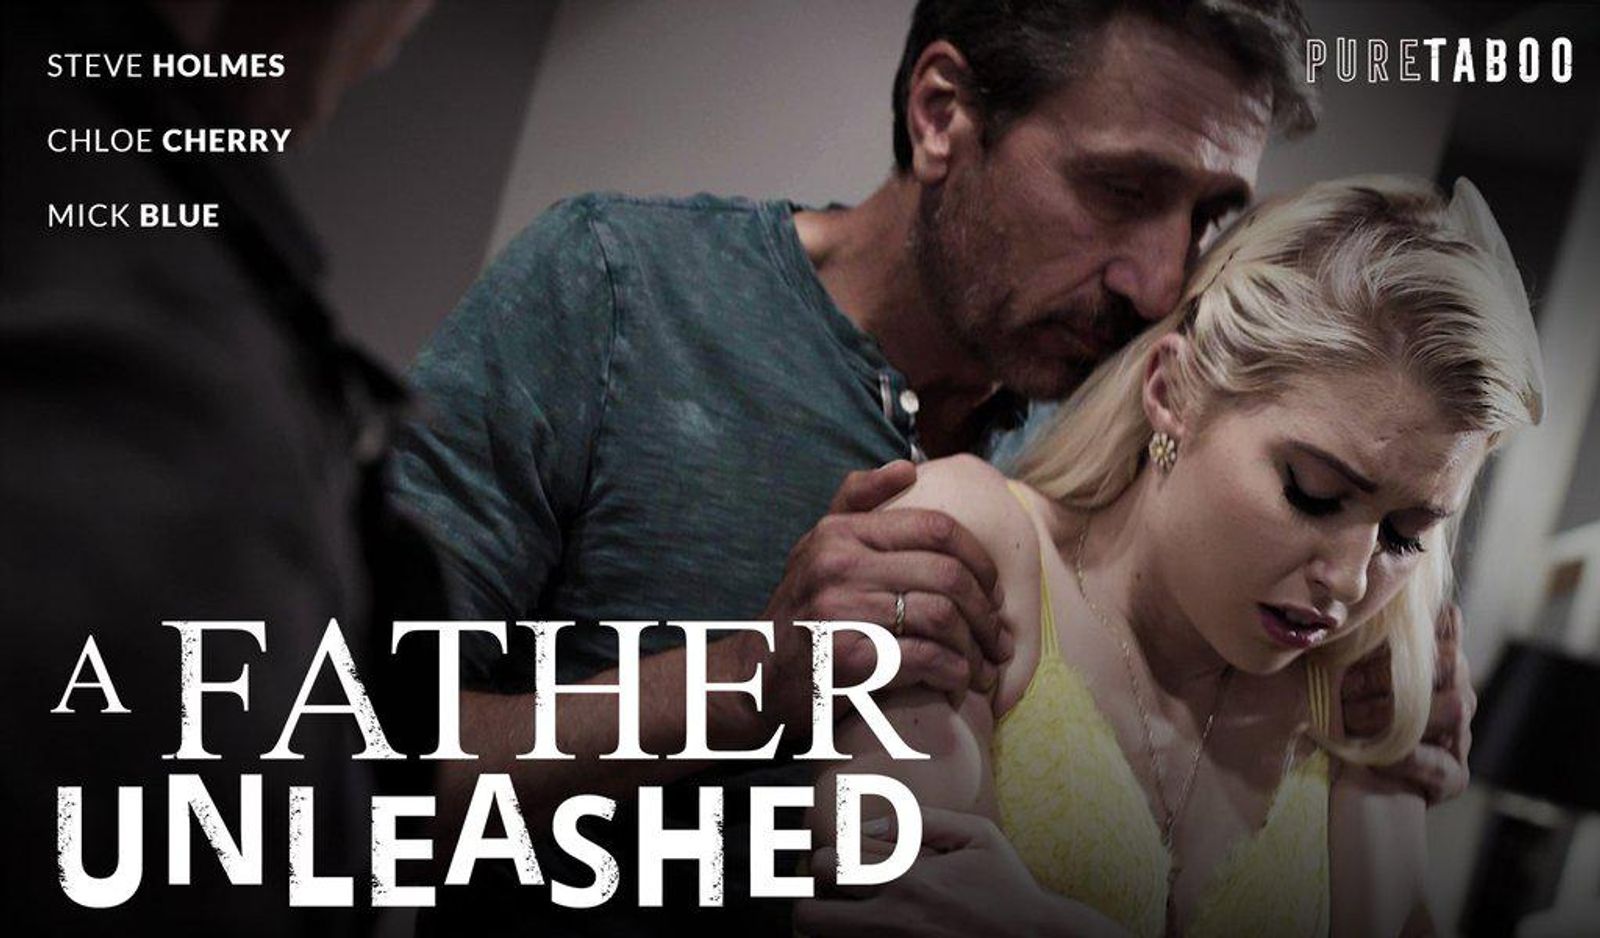 Steve Holmes Is ‘A Father Unleashed’ in New Pure Taboo DVD